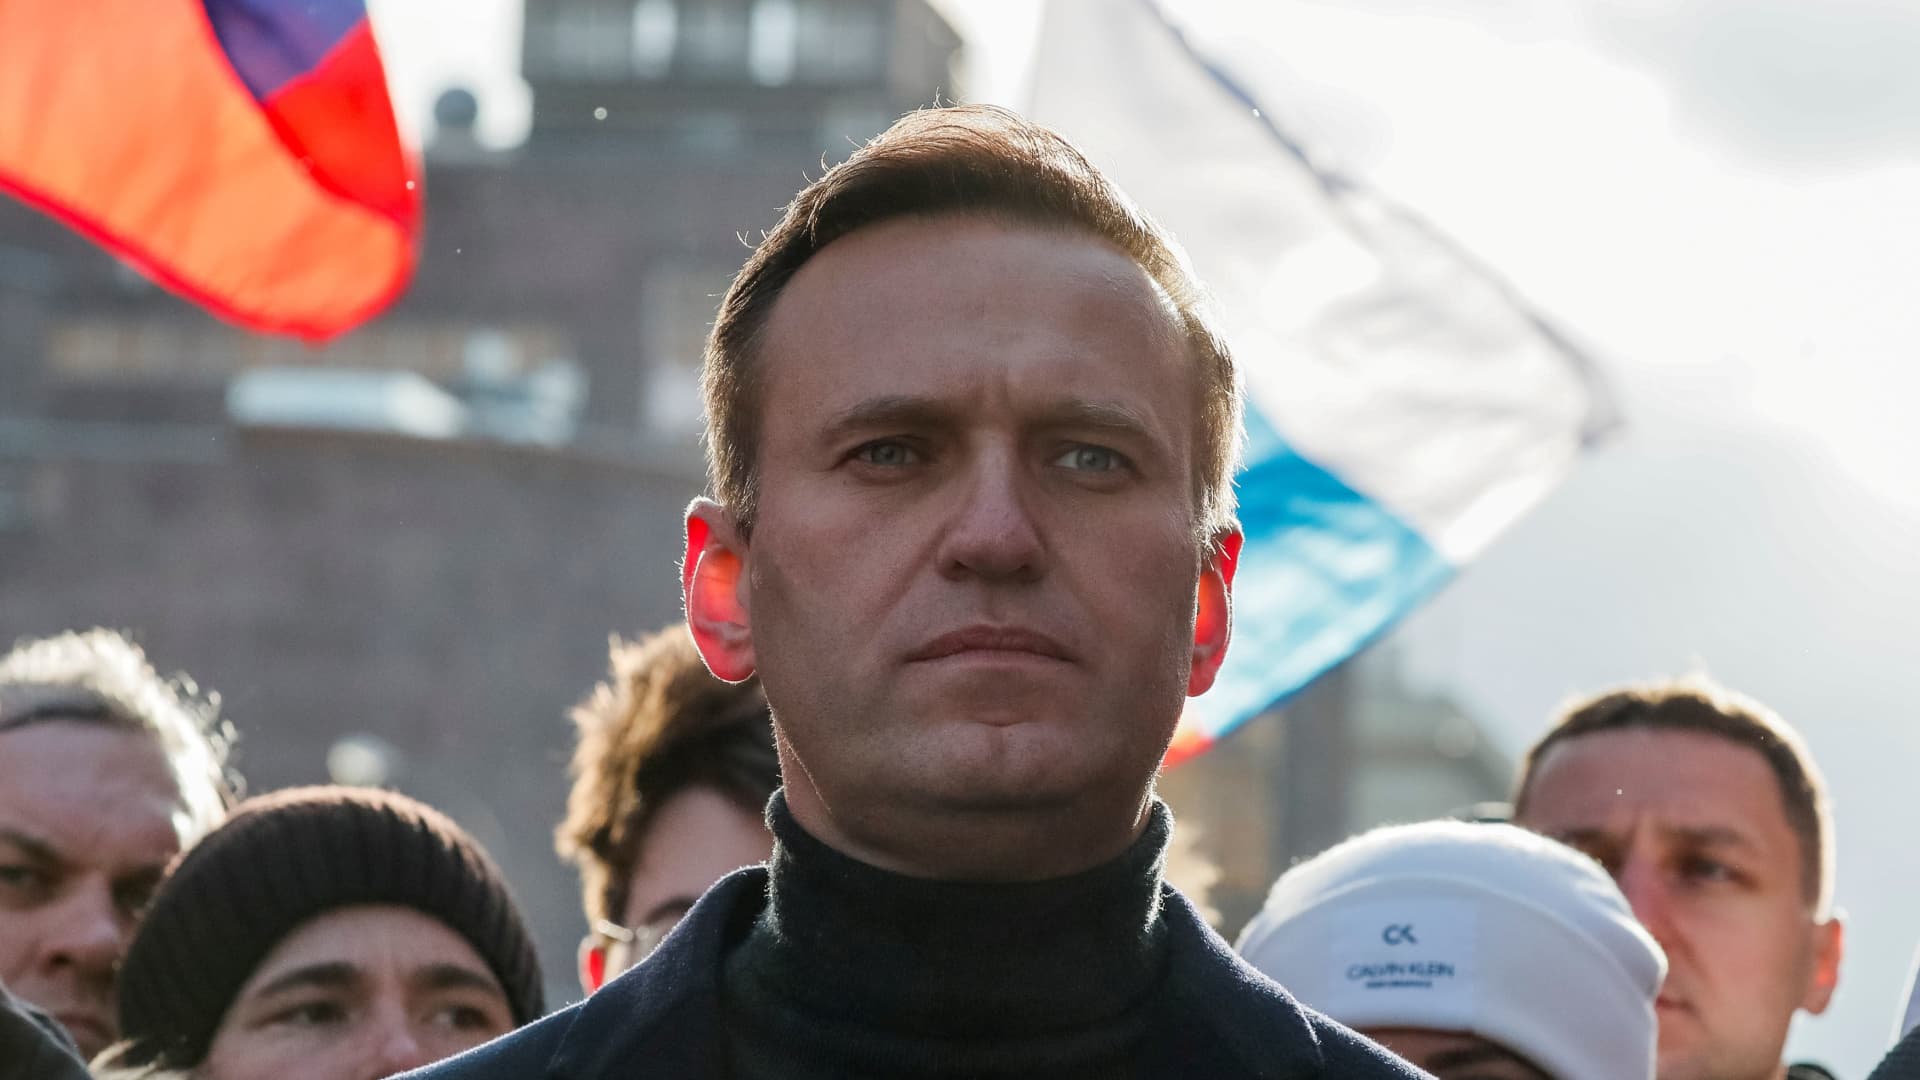 Russian opposition politician Alexei Navalny takes part in a rally to mark the 5th anniversary of opposition politician Boris Nemtsov's murder and to protest against proposed amendments to the country's constitution, in Moscow, Russia February 29, 2020.